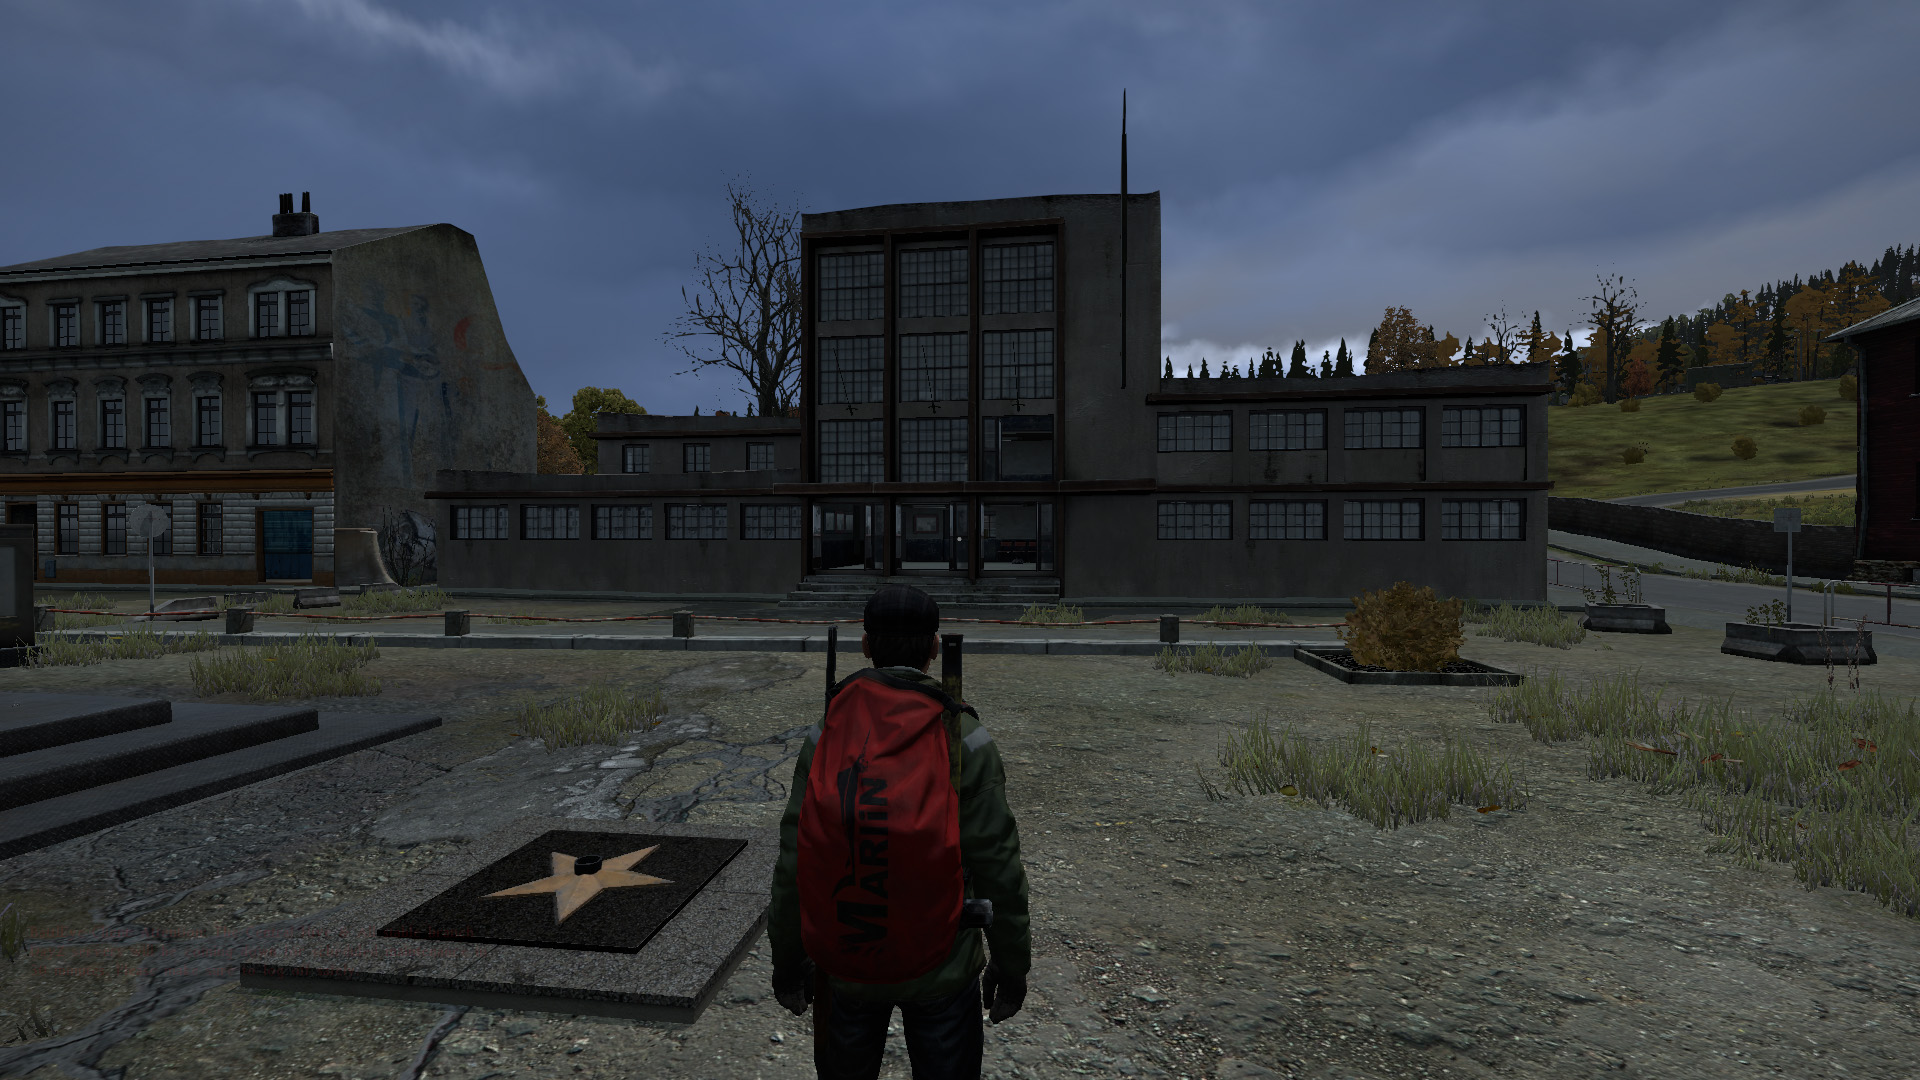 A School building commonly found in DayZ.